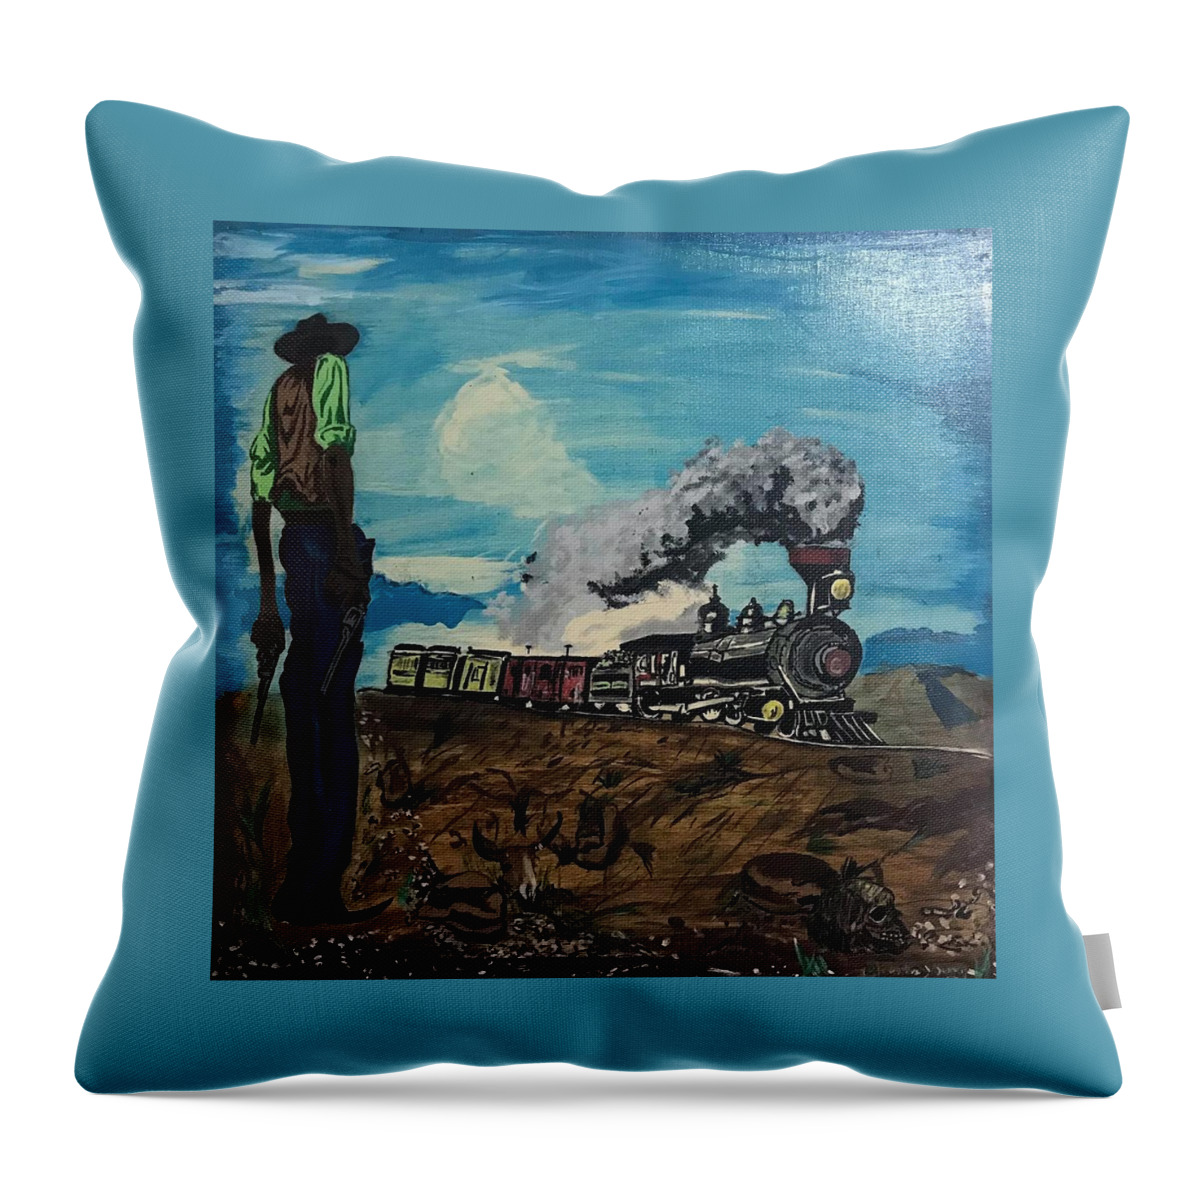  Throw Pillow featuring the painting Waitin in the Cut by Charles Young